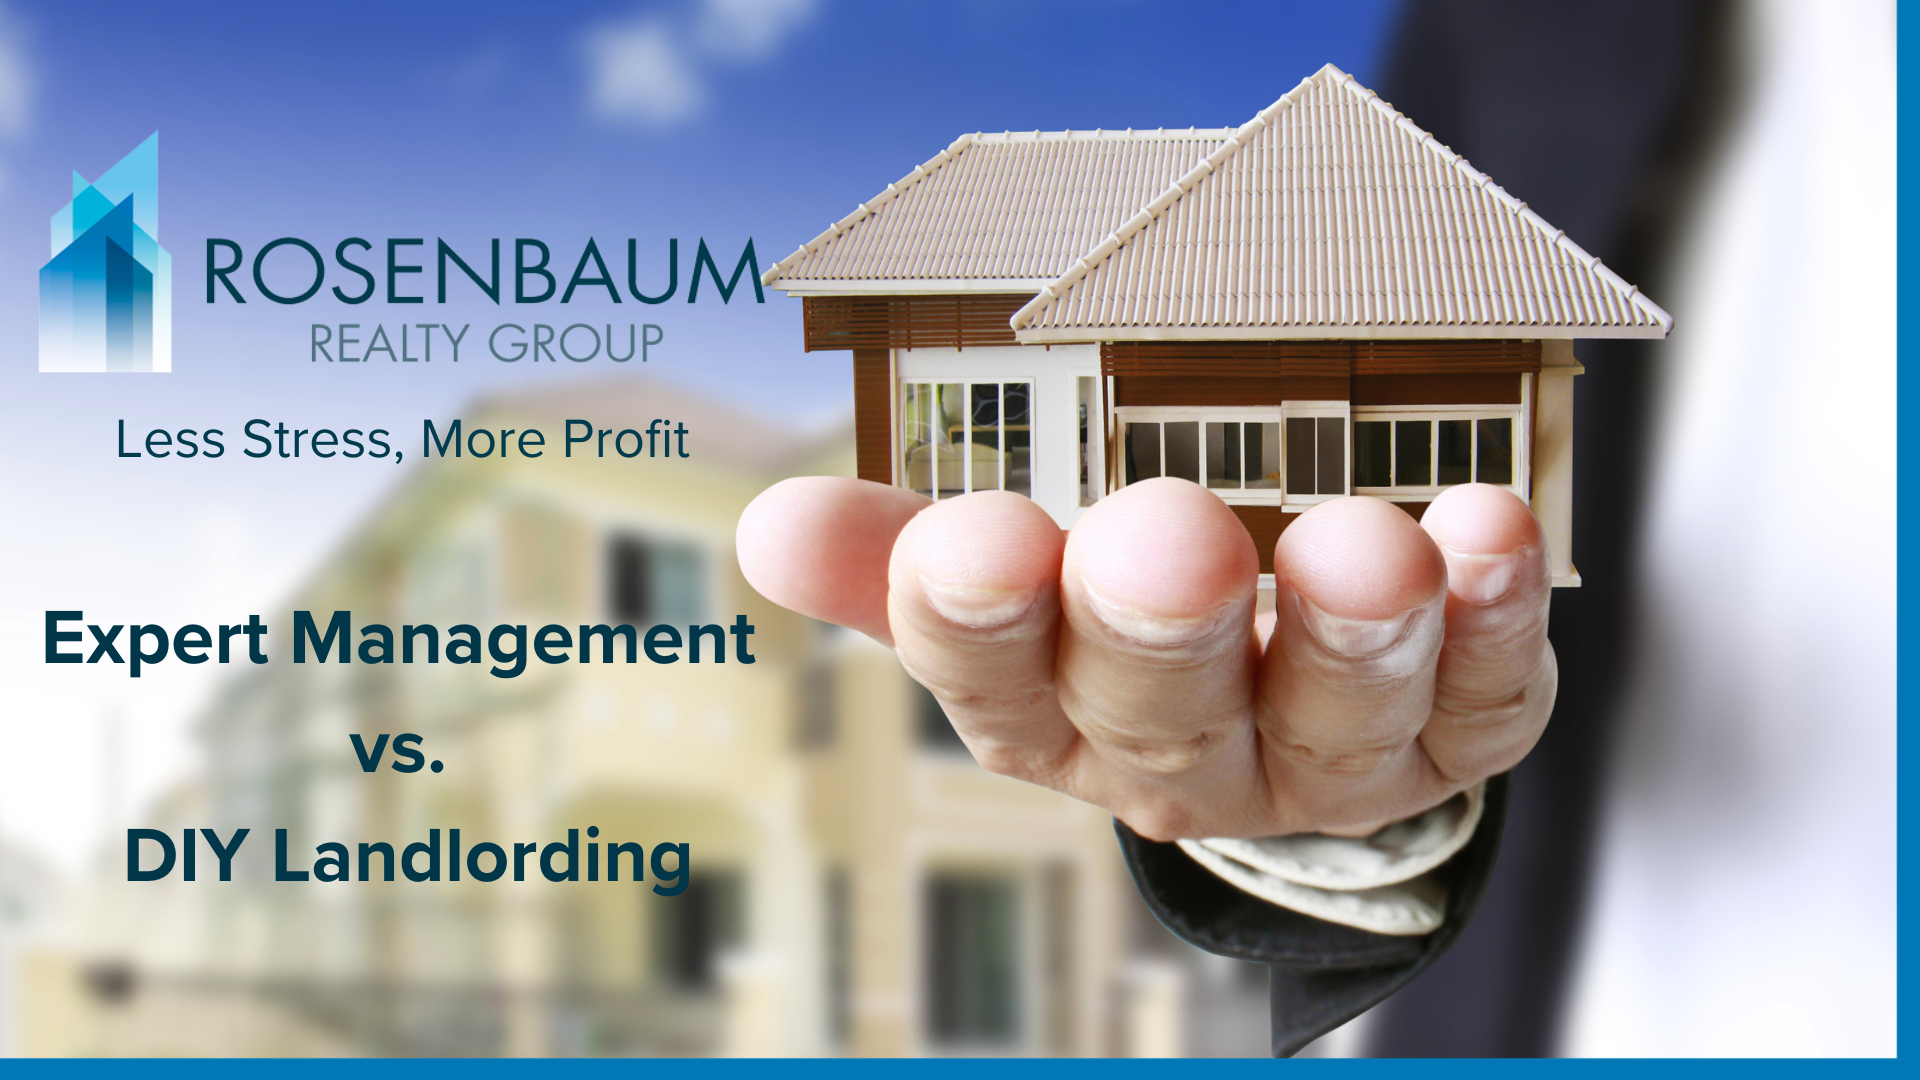 Maximize Your Investment: Why Choosing a Property Management Company Beats DIY Landlording